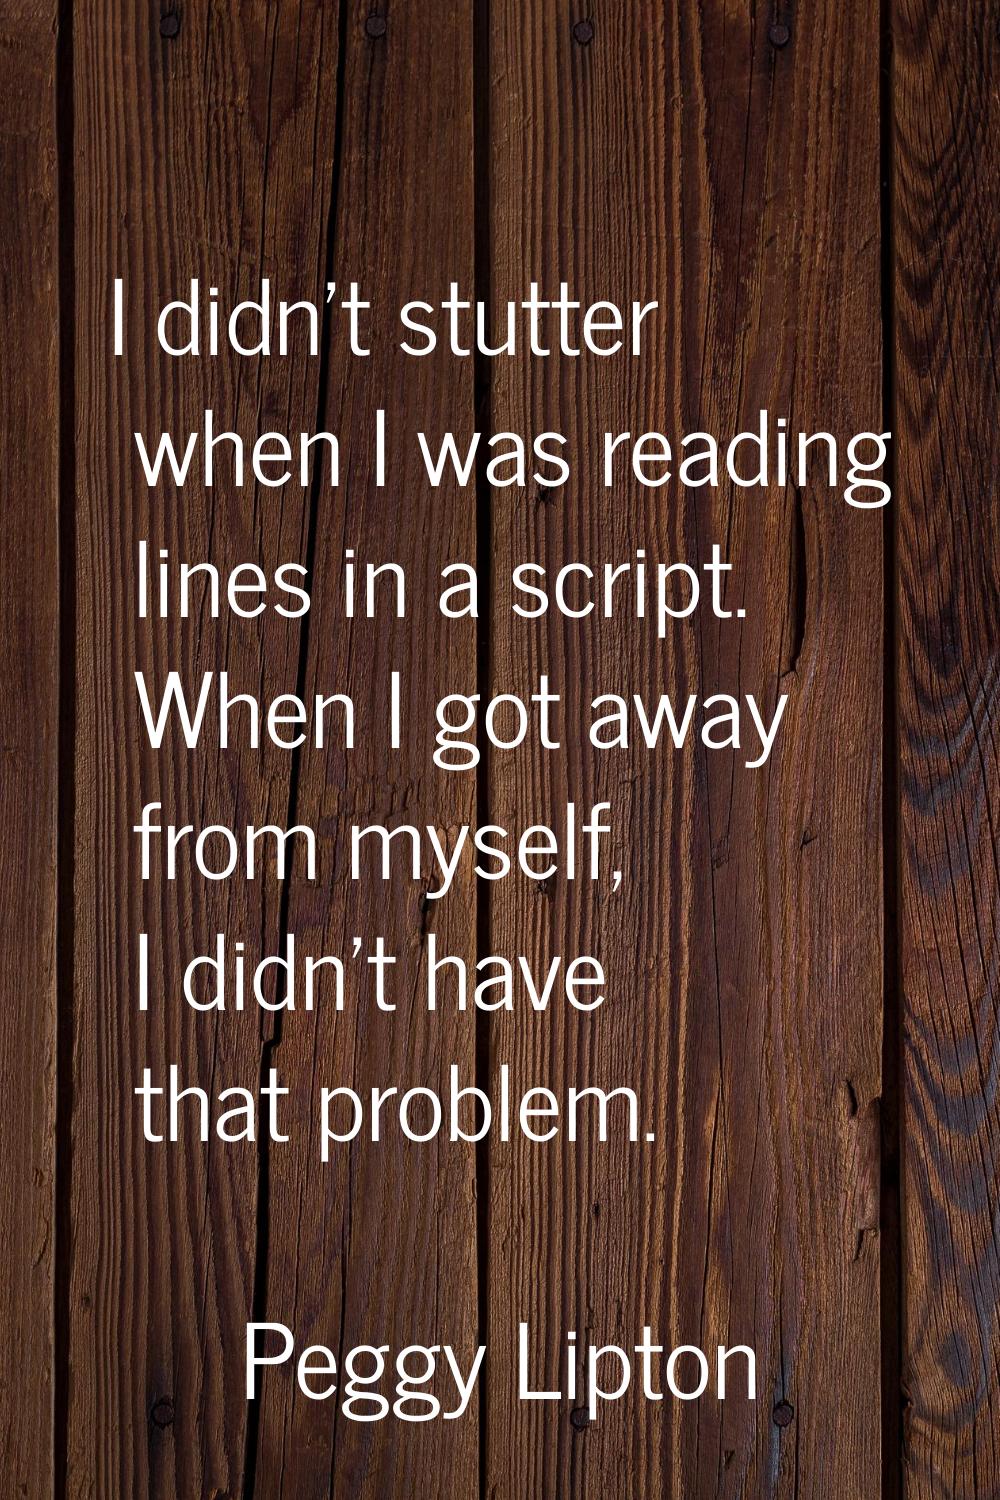 I didn't stutter when I was reading lines in a script. When I got away from myself, I didn't have t